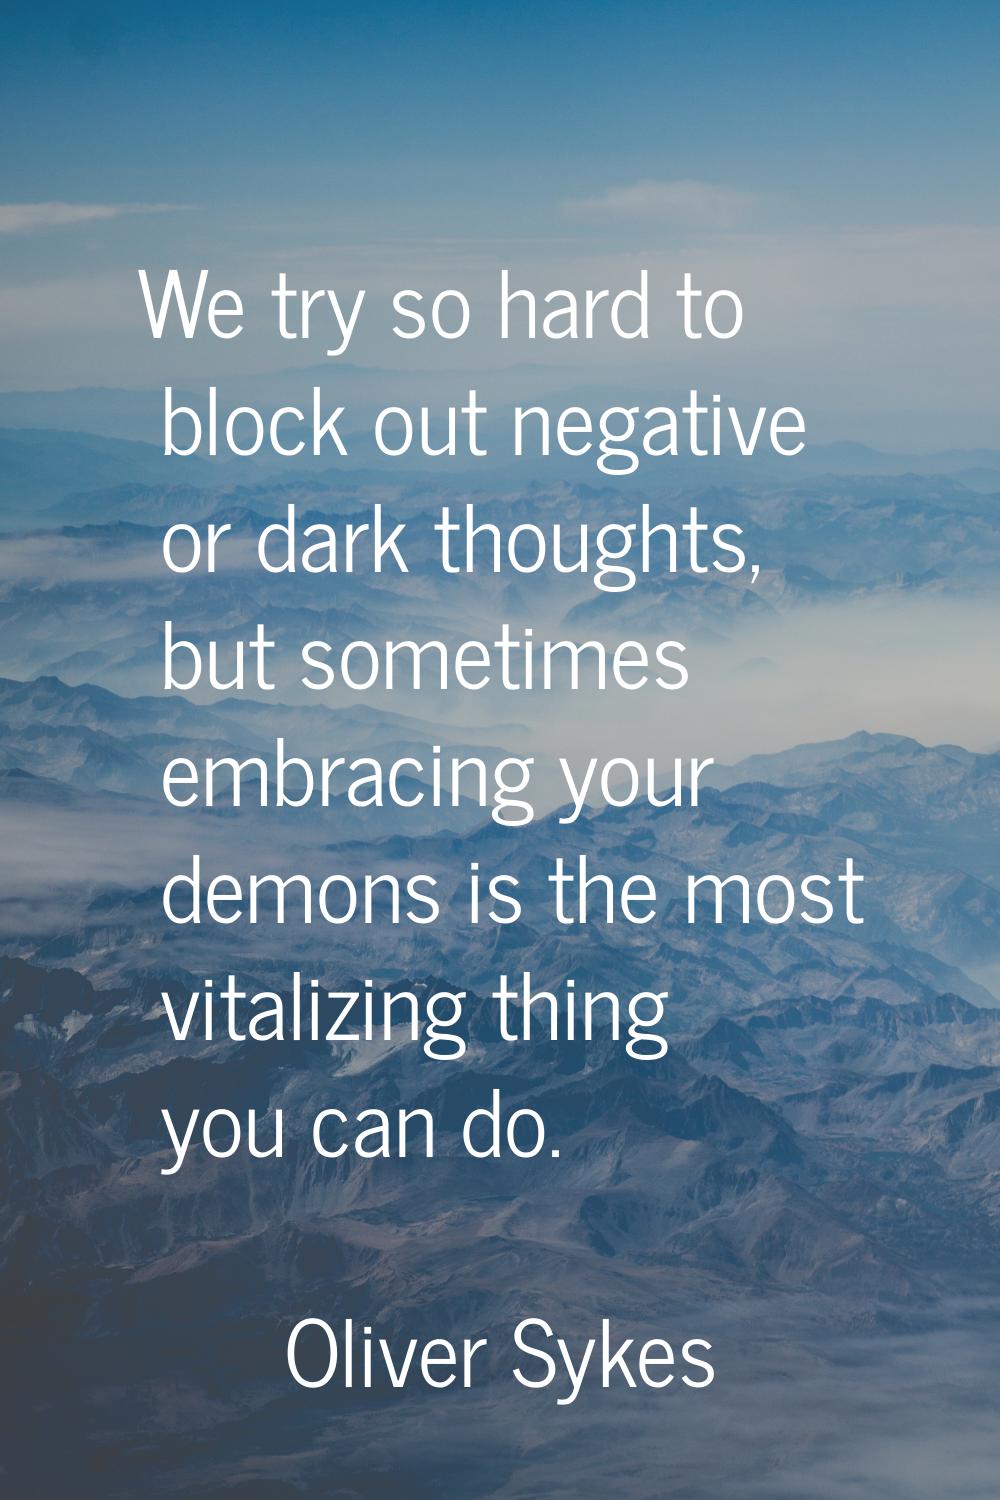 We try so hard to block out negative or dark thoughts, but sometimes embracing your demons is the m